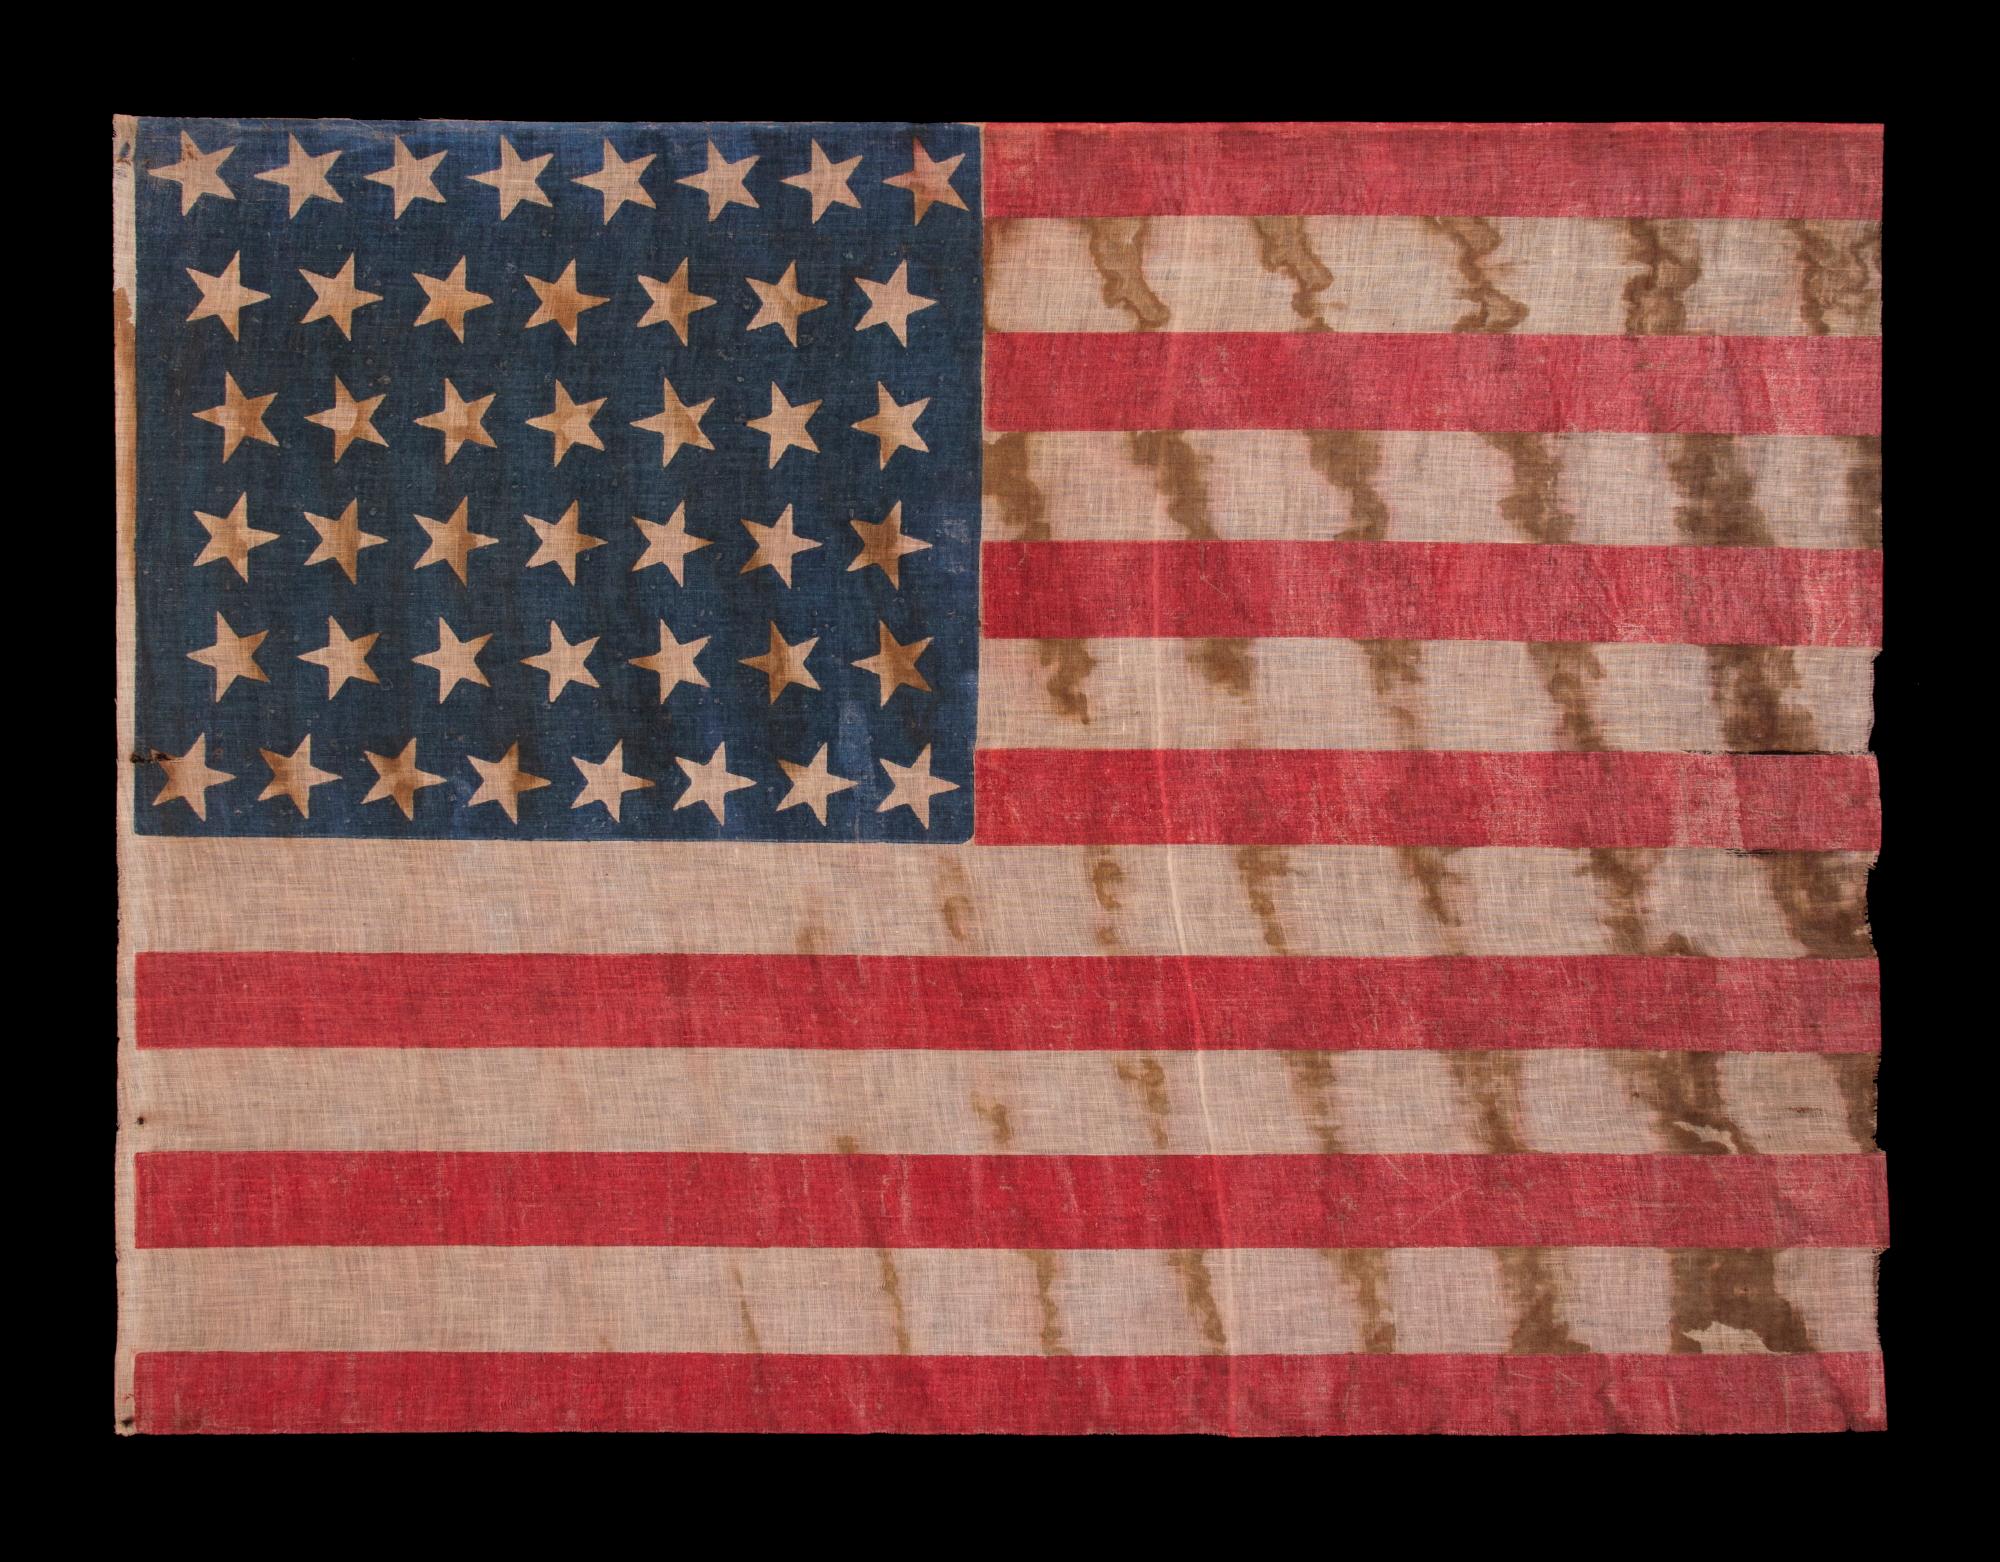 44 STAR ANTIQUE AMERICAN FLAG WITH AN HOURGLASS FORMATION OF STARS IN CANTED ROWS, AND AN EXTREMELY INTERESTING PRESENTATION FROM REPEATING SWATHS OF HEAVY OXIDATION, WYOMING STATEHOOD, 1890-1896

Wyoming was admitted as the 44th state on July